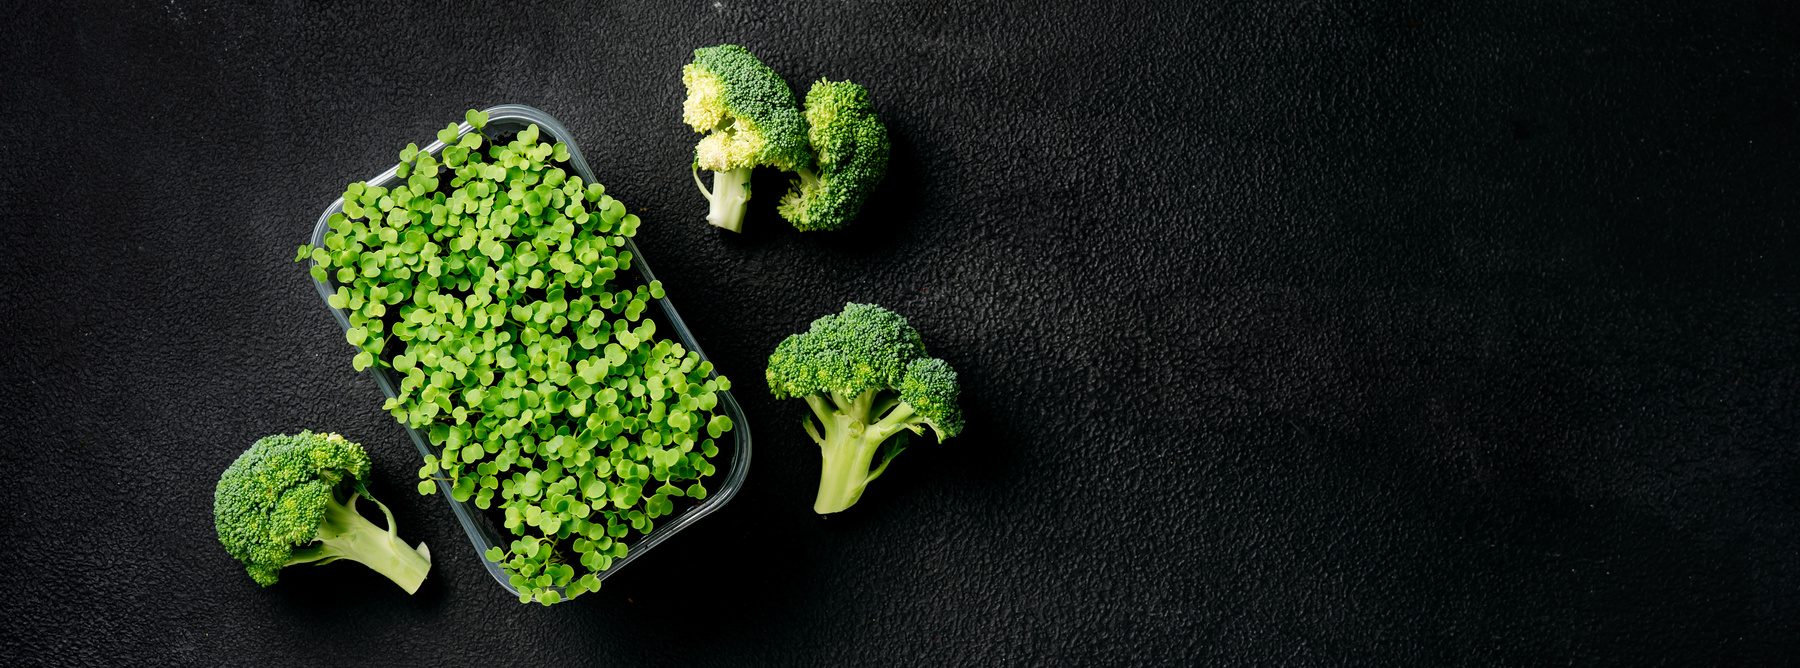 Broccoli rich in sulforaphane phytochemical and antioxidants